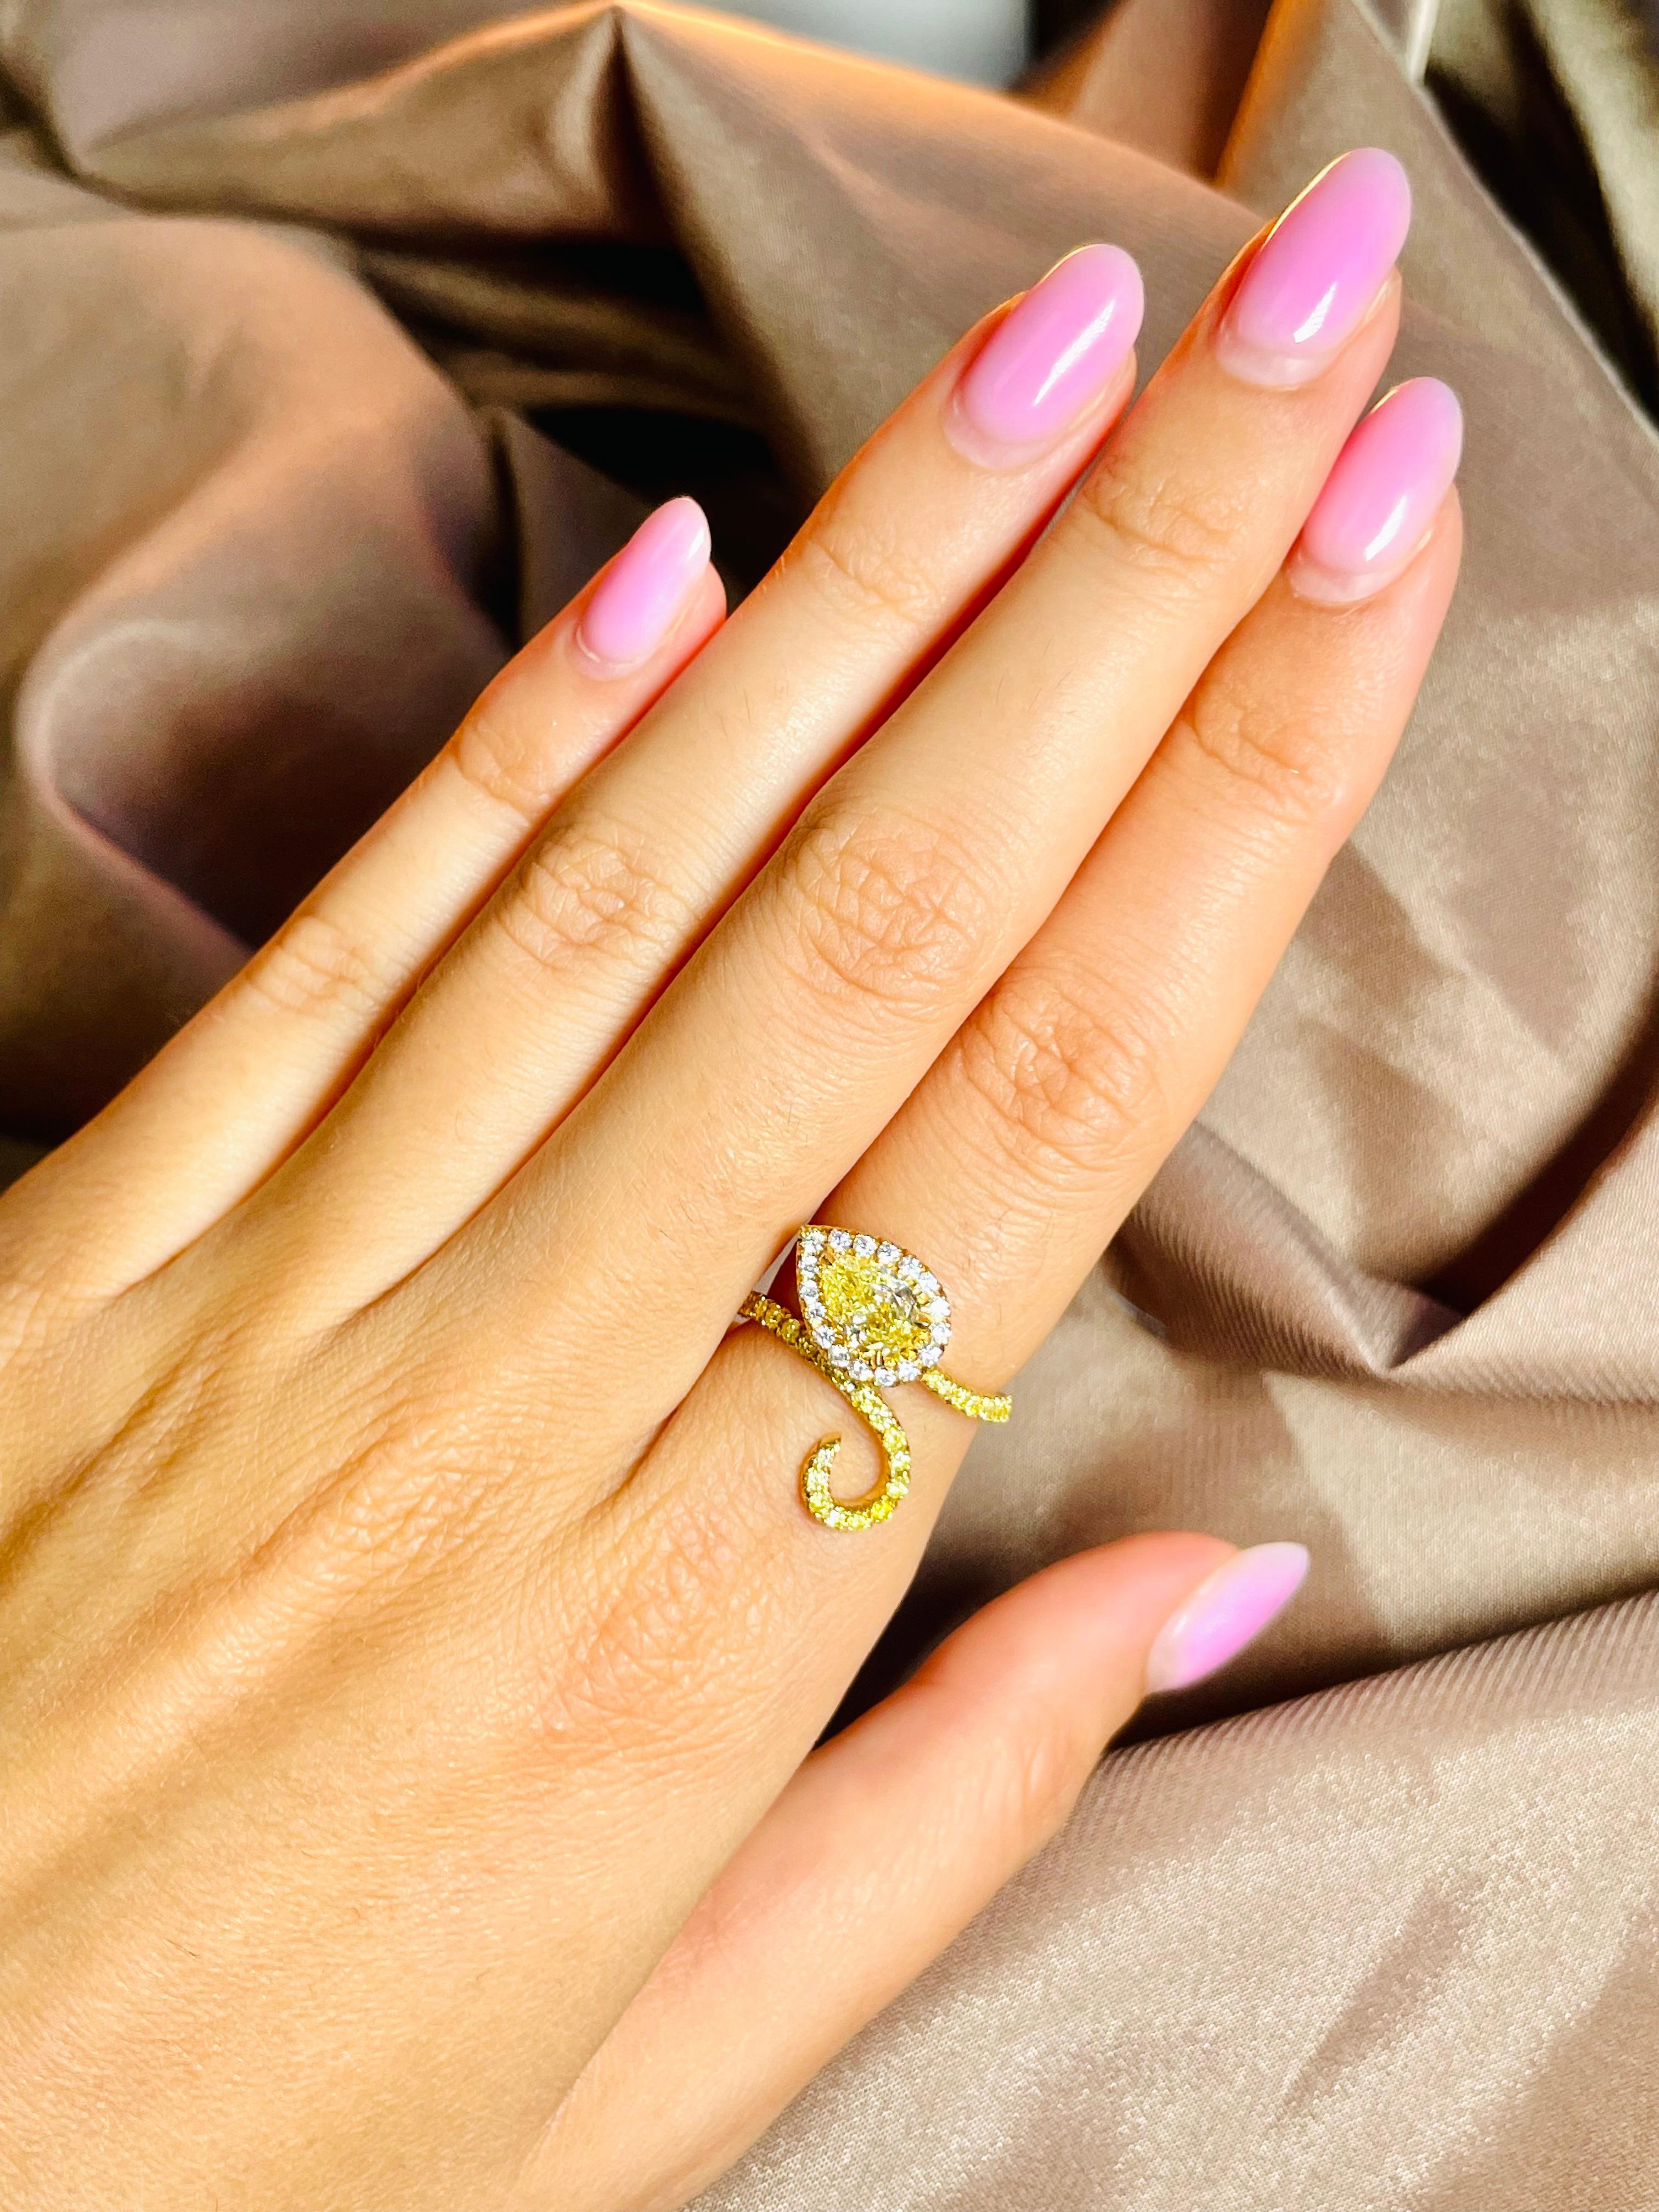 Featuring a unique Snake Diamond Ring, showcasing a remarkable GIA Certified Pear-shaped 1-carat Fancy Yellow Diamond with VS2 clarity. Encircling the captivating center stone are 17 round brilliant white Diamonds, complemented by an enchanting